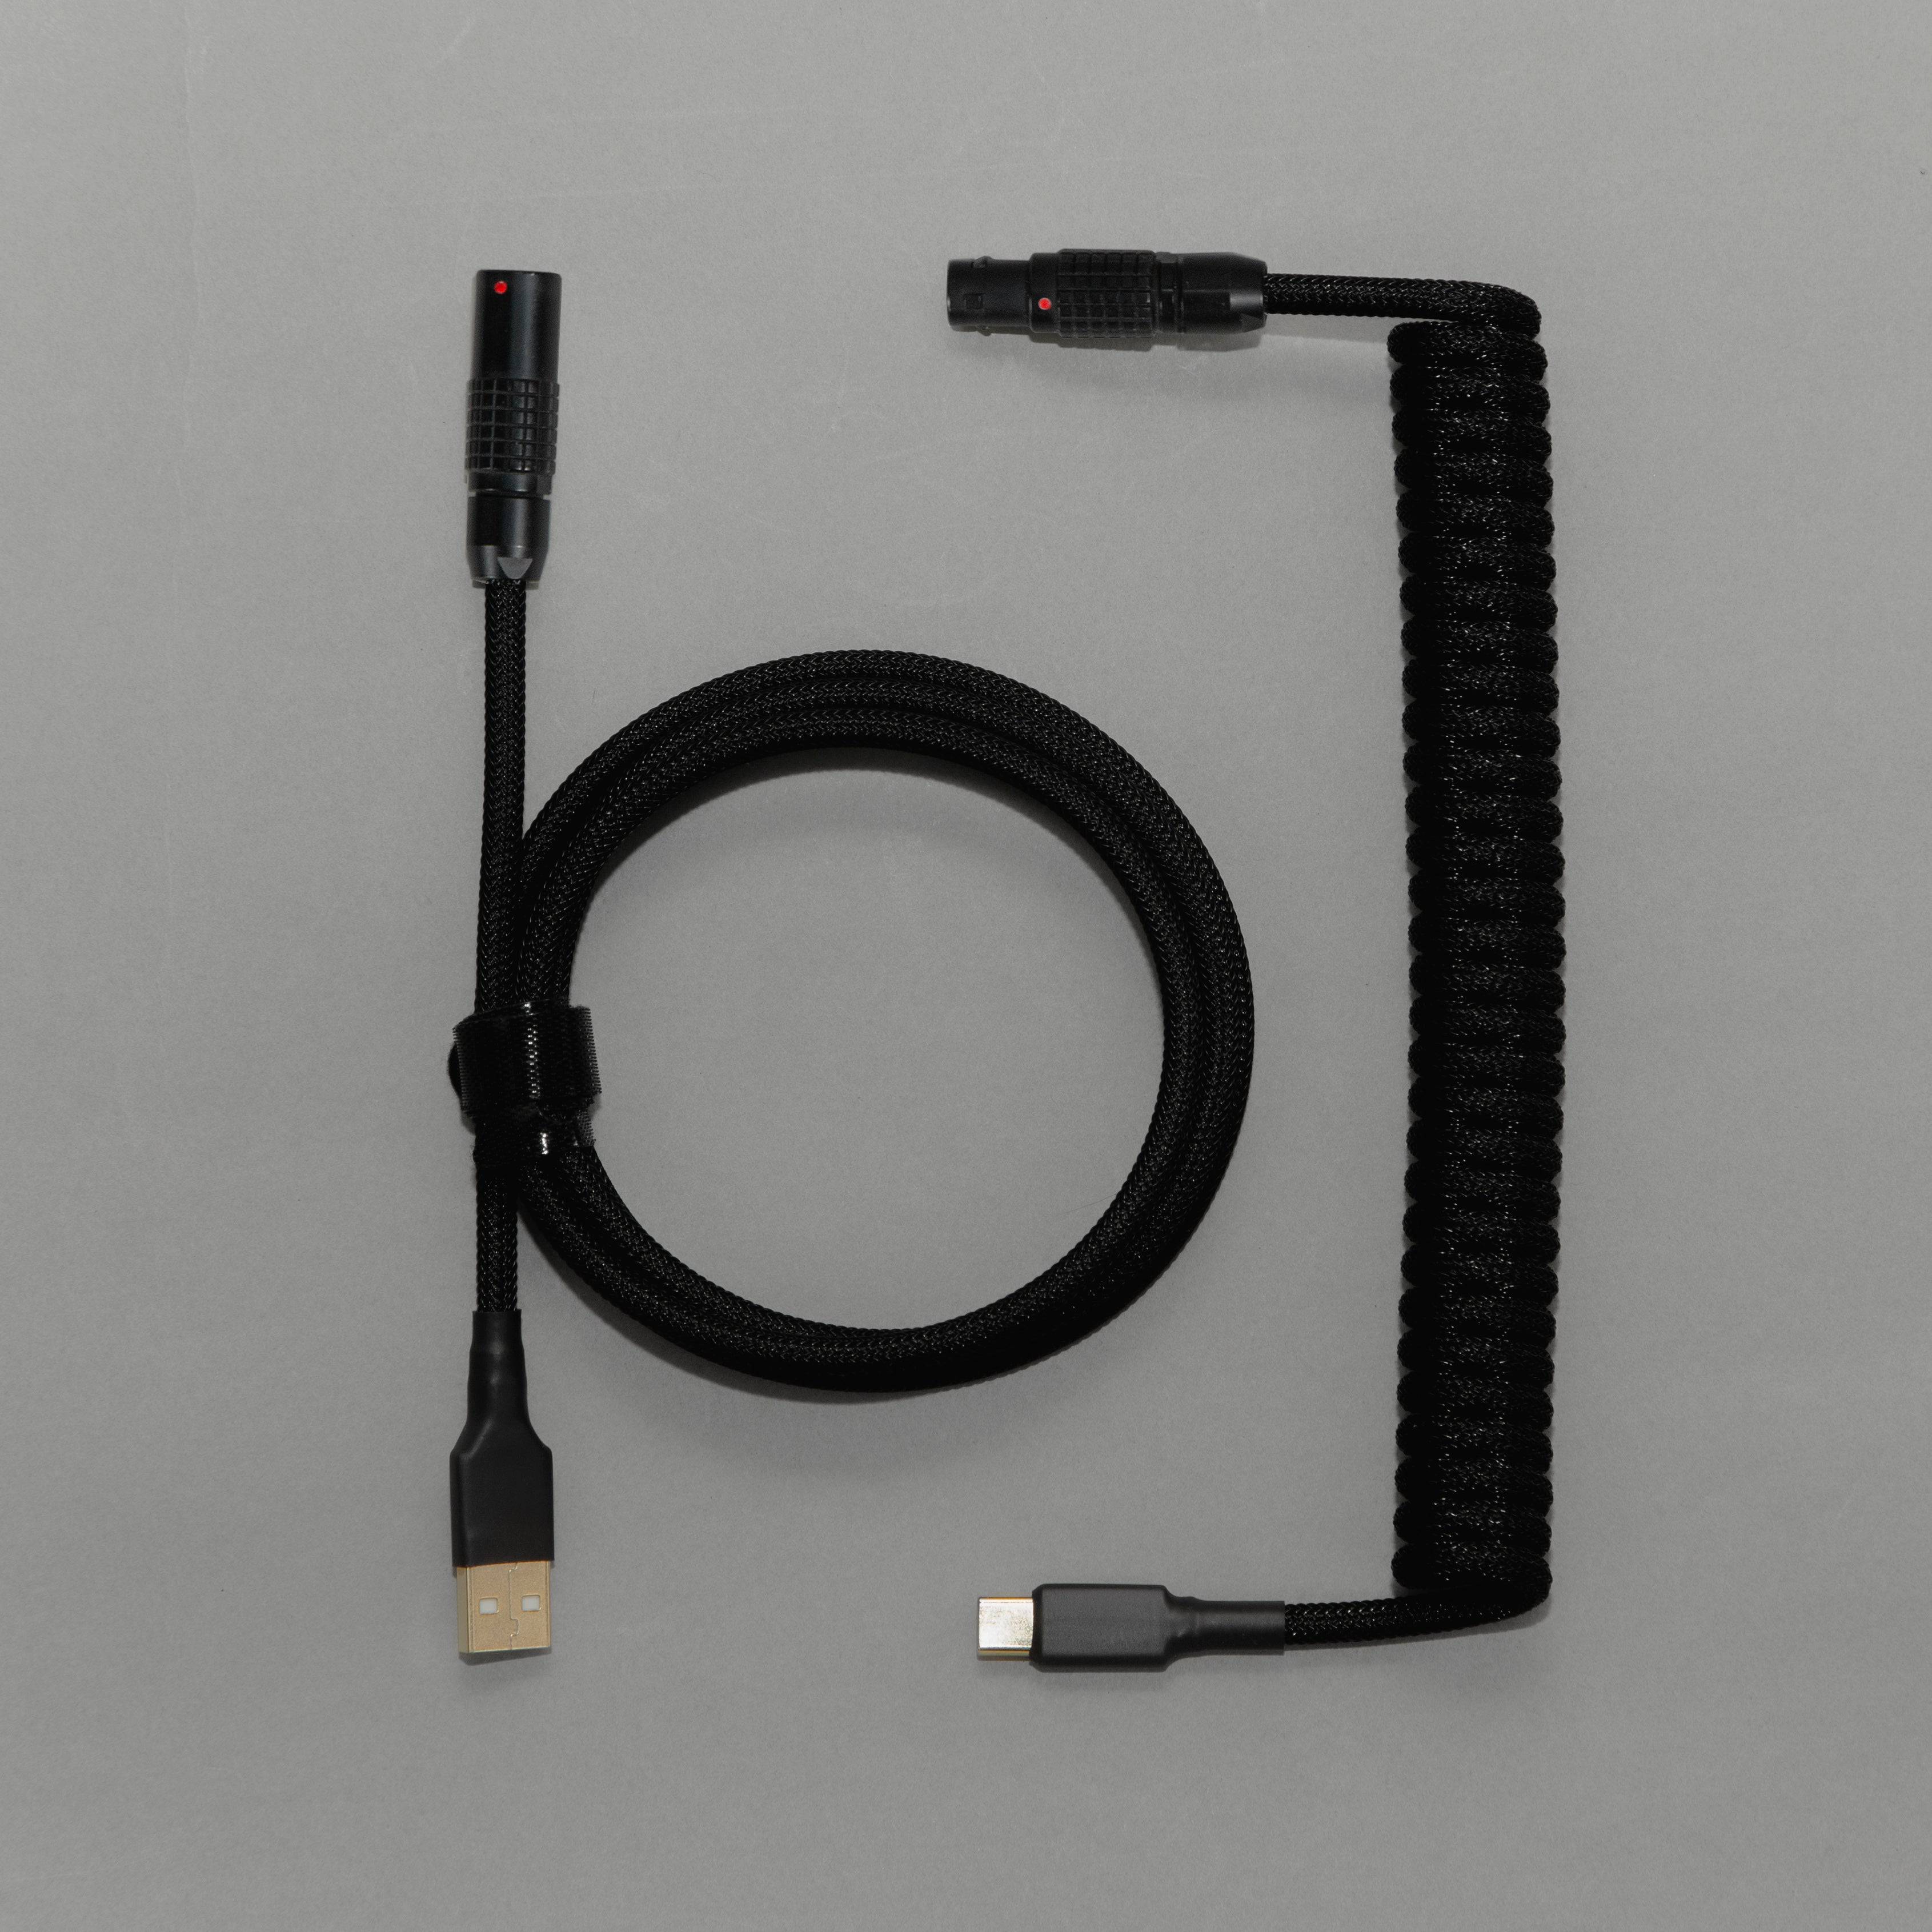 Viendi 8L All Black Luxury Cable proxied by KeebsForAll